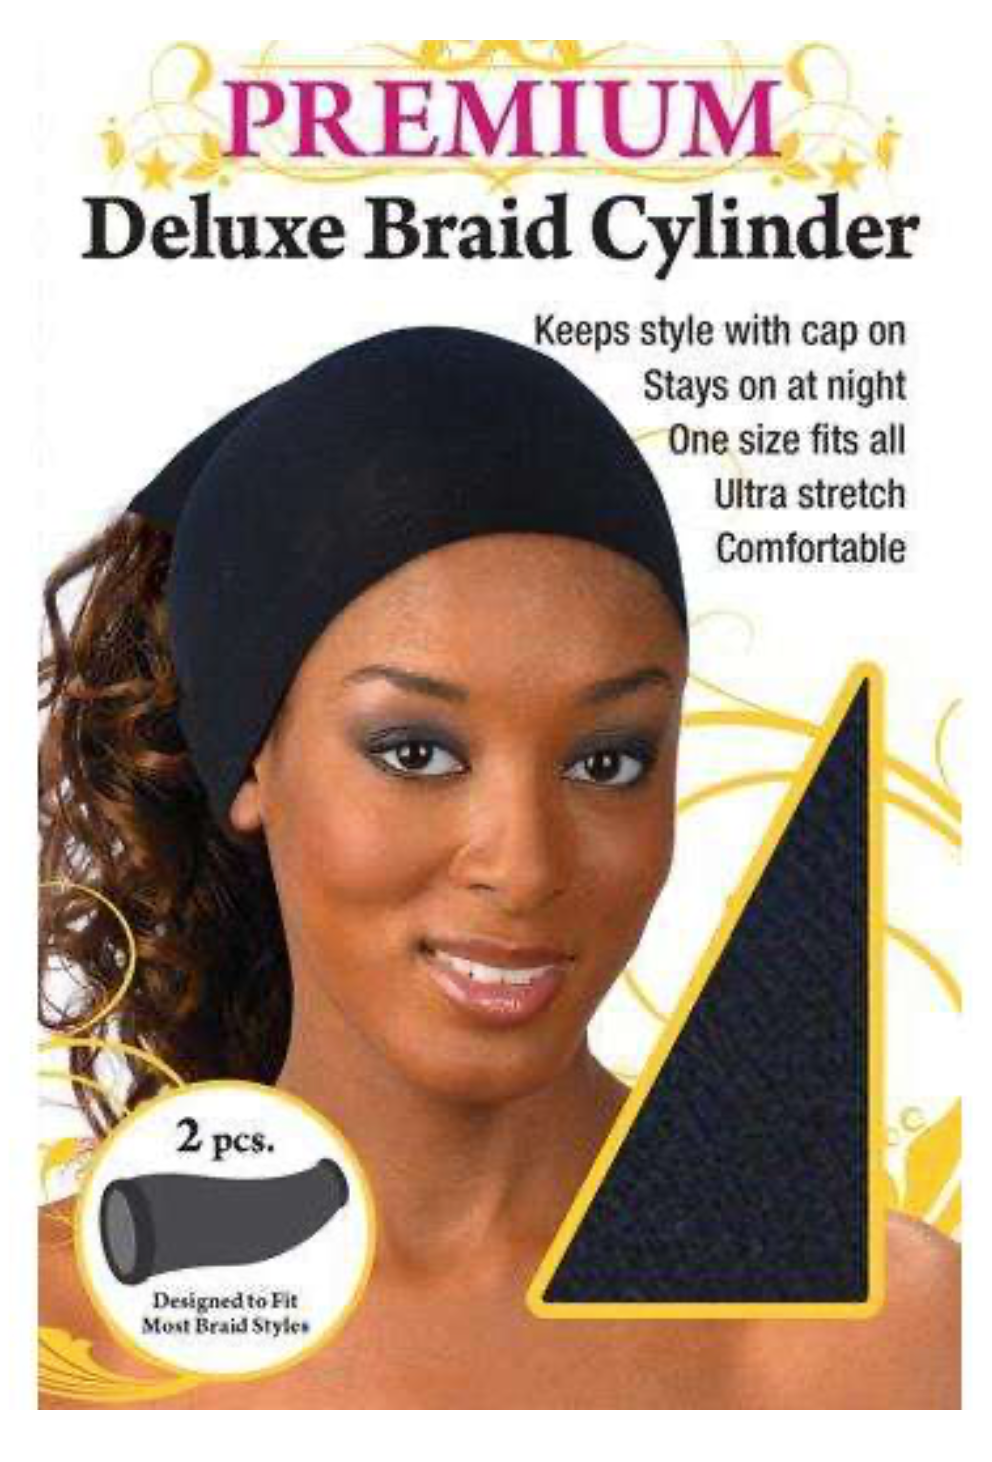 Ms. Remi Deluxe Braid Cylinder 2Pc Asst Color 04569